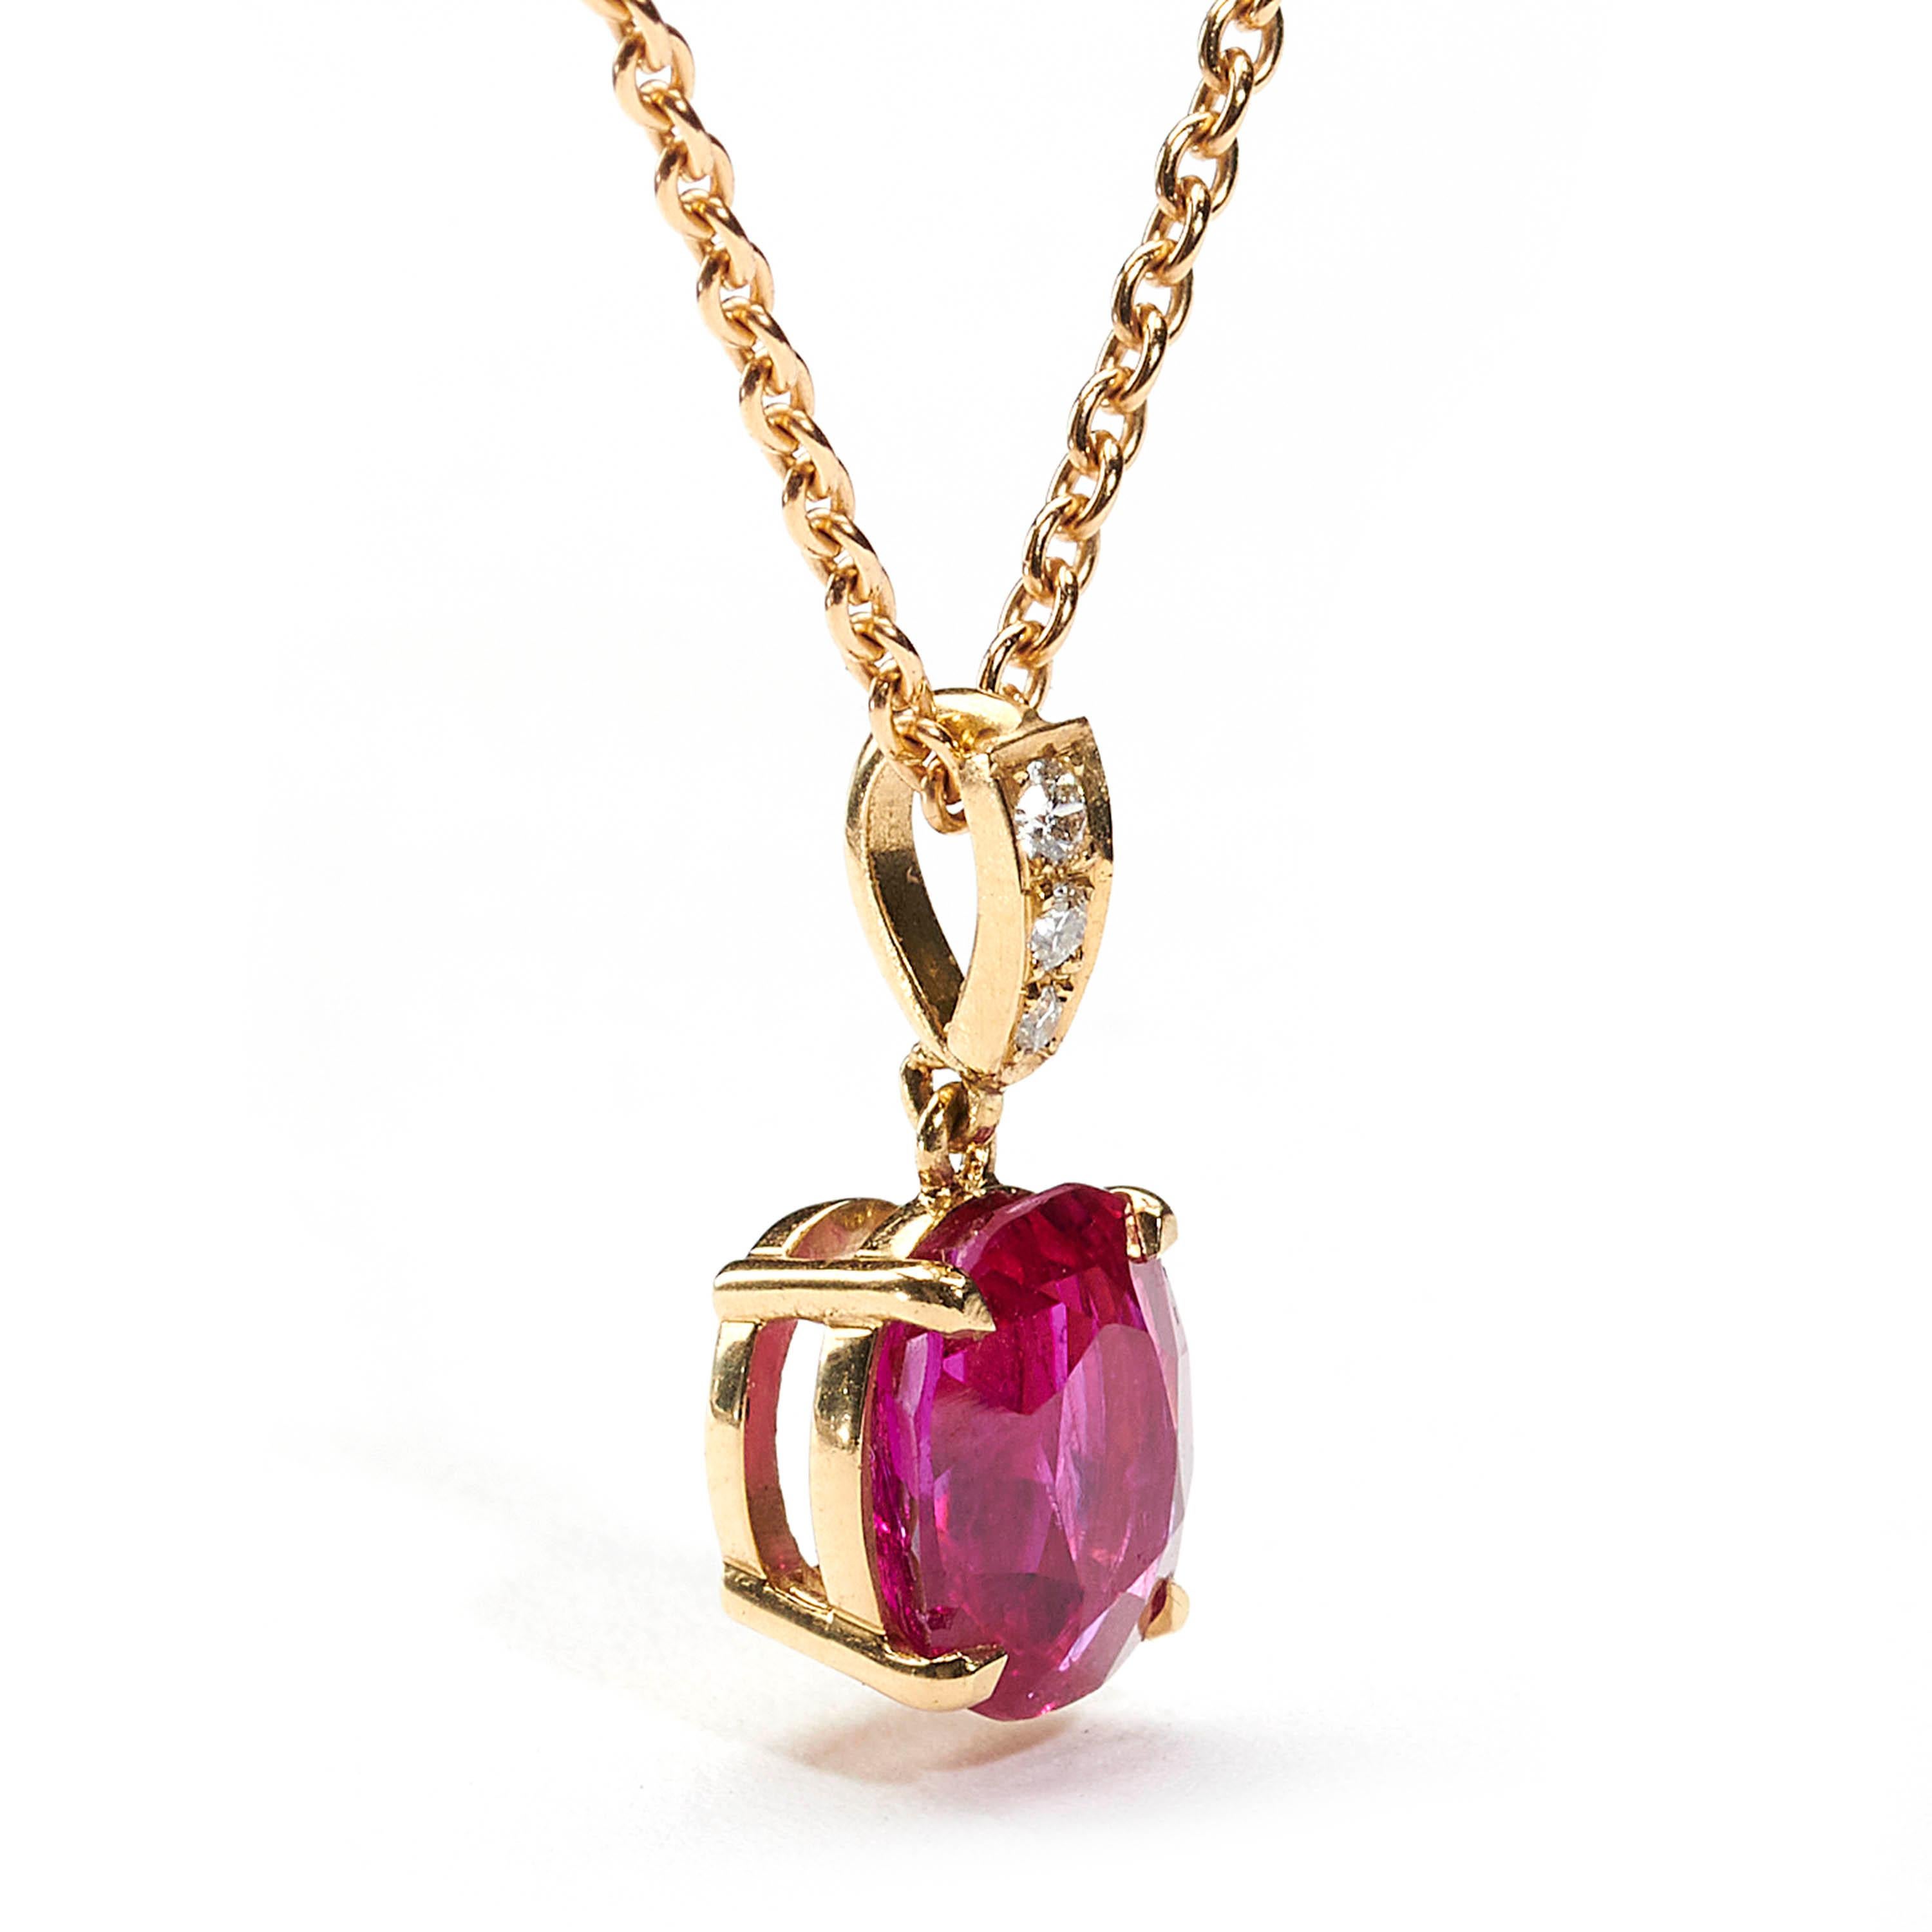 A ruby and diamond pendant, set with a 3.18ct cushion-cut faceted mixed-cut ruby, with a three round brilliant cut diamonds set in the bail, mounted in 18ct gold, with an 18